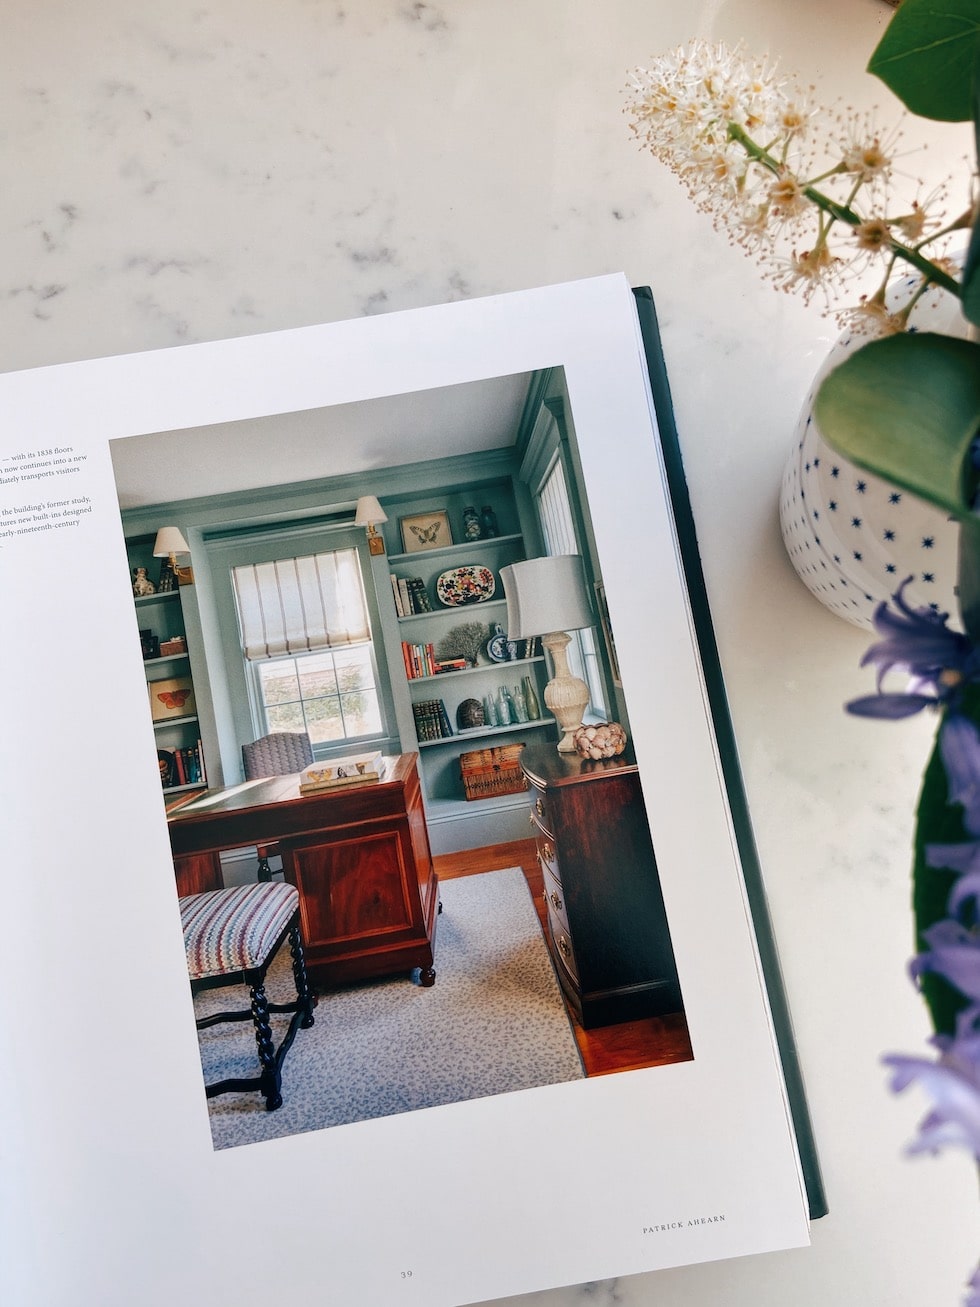 My All Time Favorite Home Decorating Book + Other Favorites!